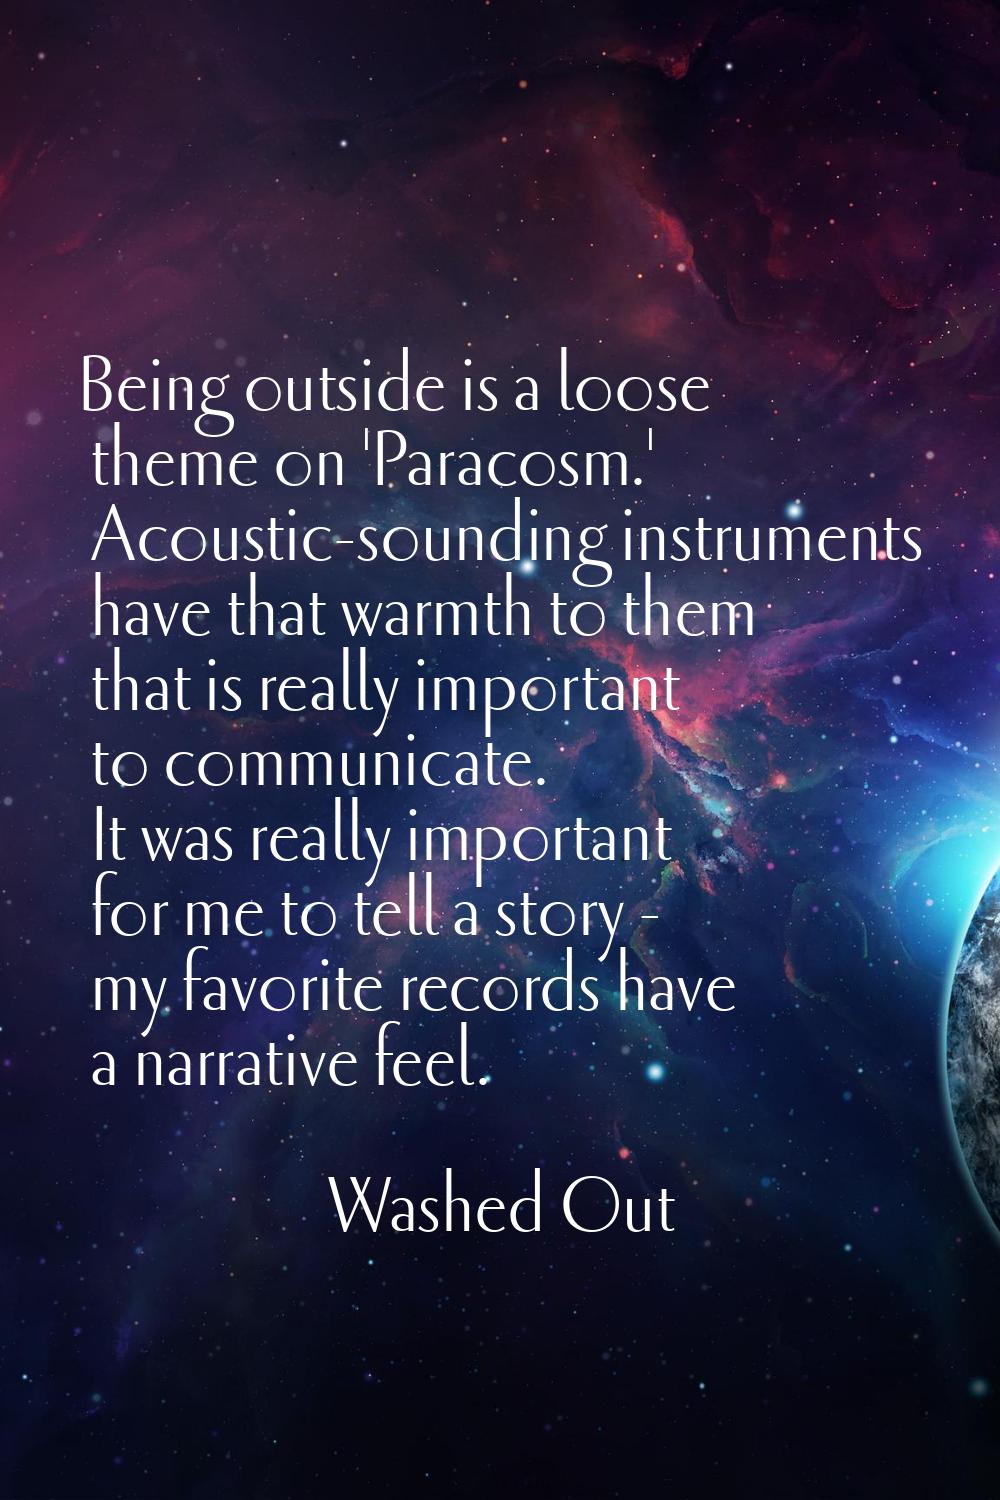 Being outside is a loose theme on 'Paracosm.' Acoustic-sounding instruments have that warmth to the